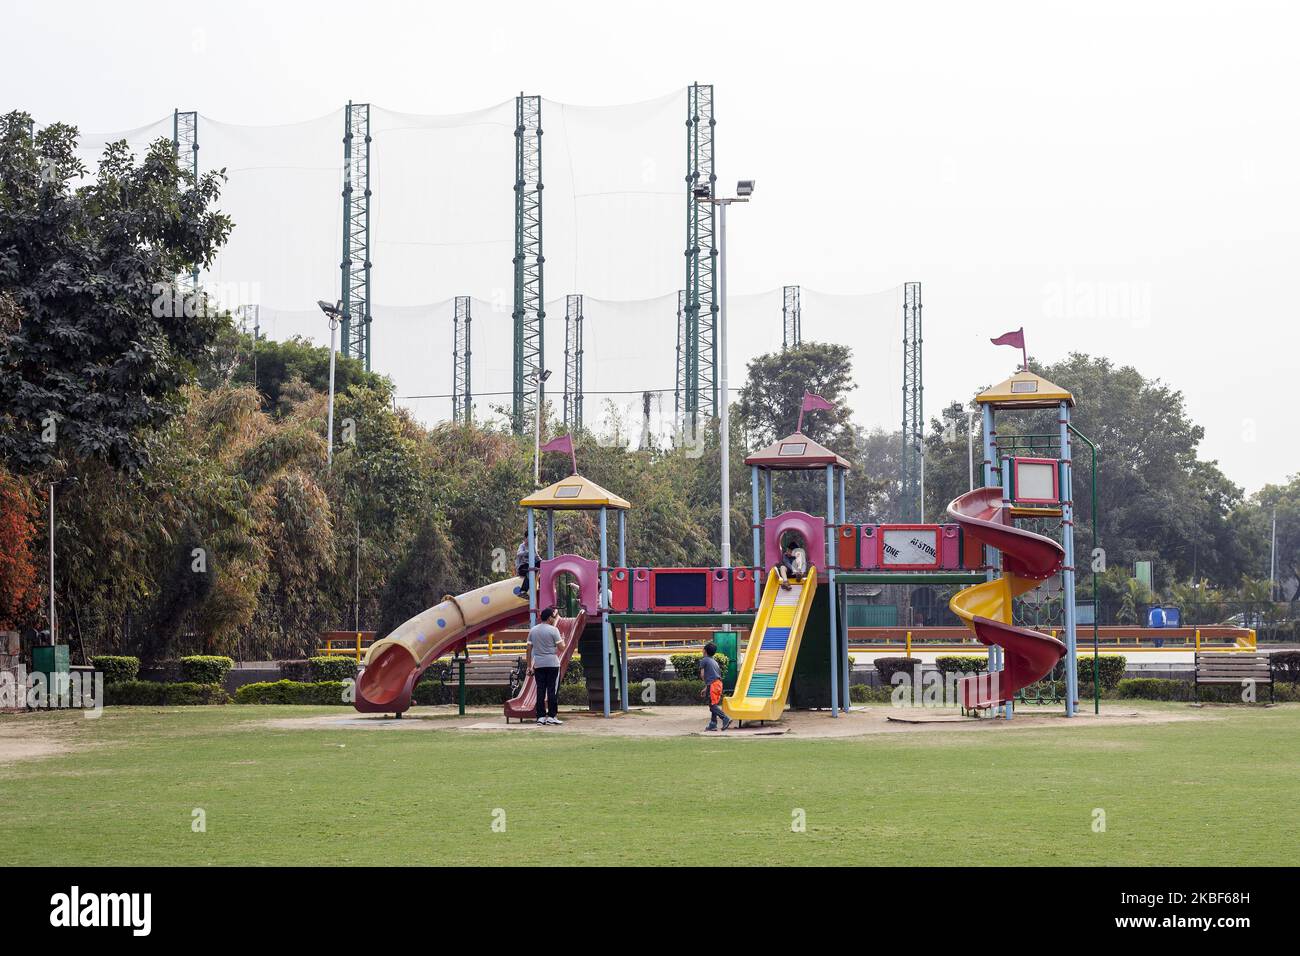 Children playground with slides pictured at Siri Fort Complex, New Delhi India on 24 February 2019. Siri Fort Complex is sport complex in South Delhi, it consists of children playgrounds, roller blades arena, swimming pool, badminton, tennis and football grounds. Siri Fort is located in the affluent and expats area of Delhi. Siri Fort is also one of the most polluted places with heavy air pollution which can be seen in the hazy sky. (Photo by Krystof Kriz/NurPhoto) Stock Photo